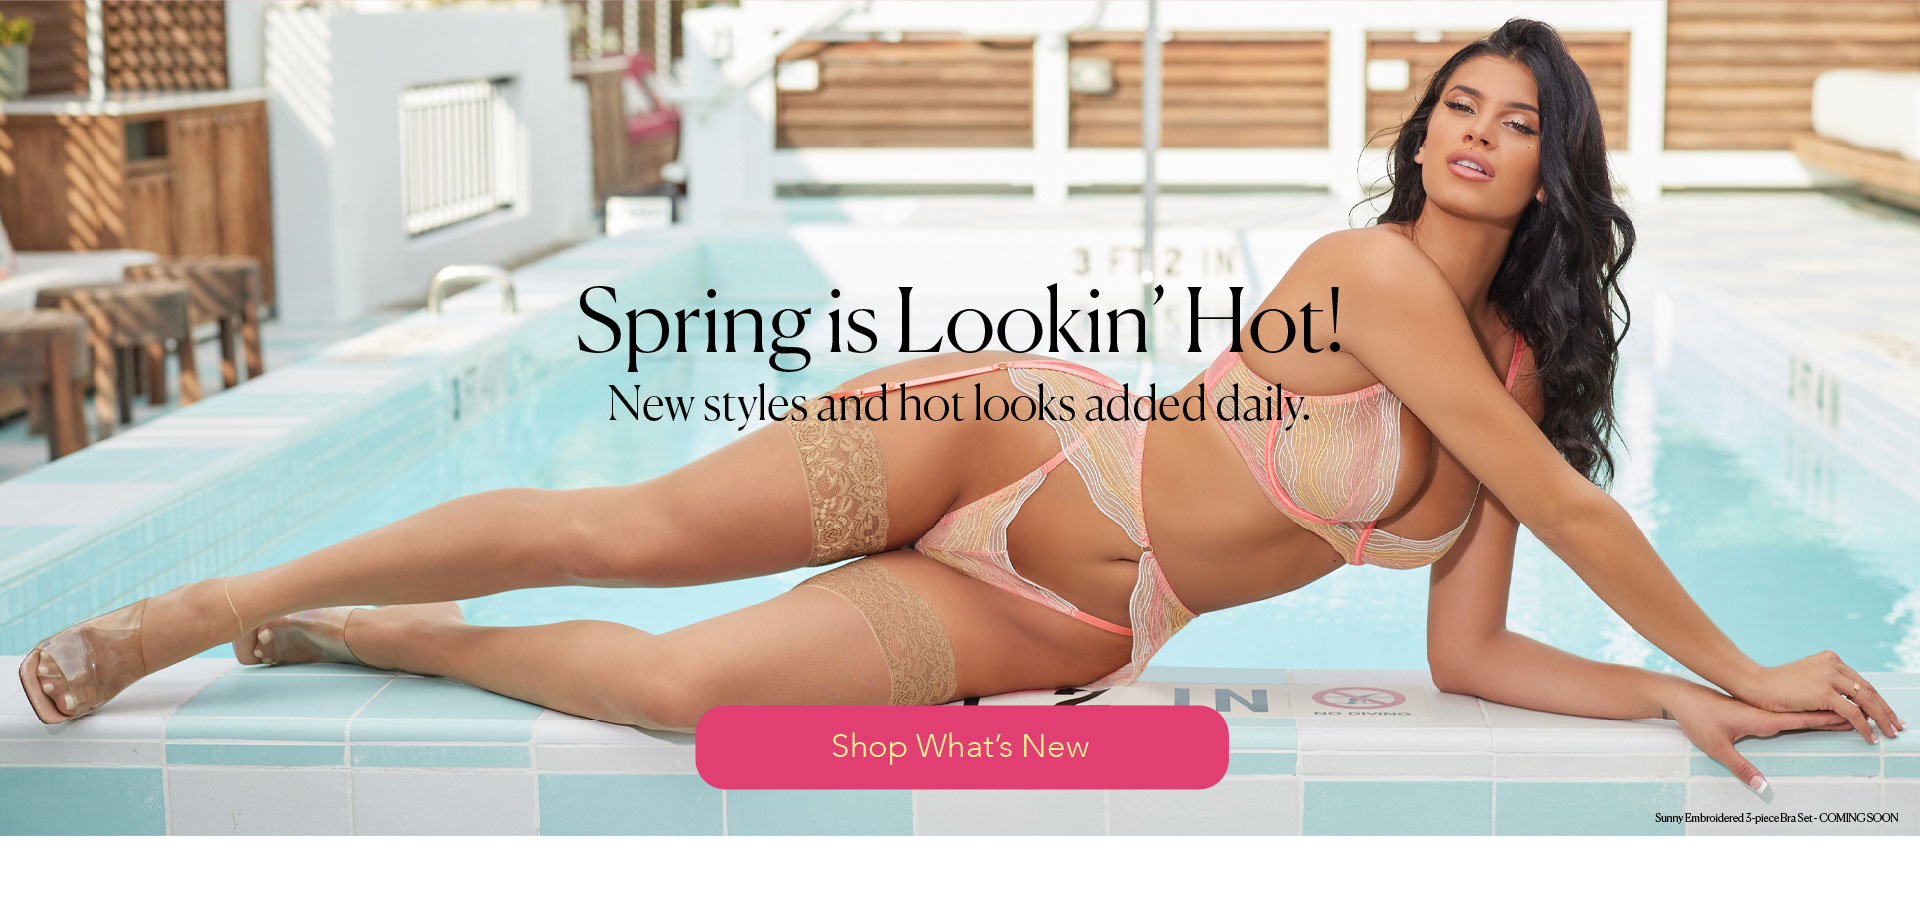 Spring is Lookin’ Hot! New styles and hot looks added daily.